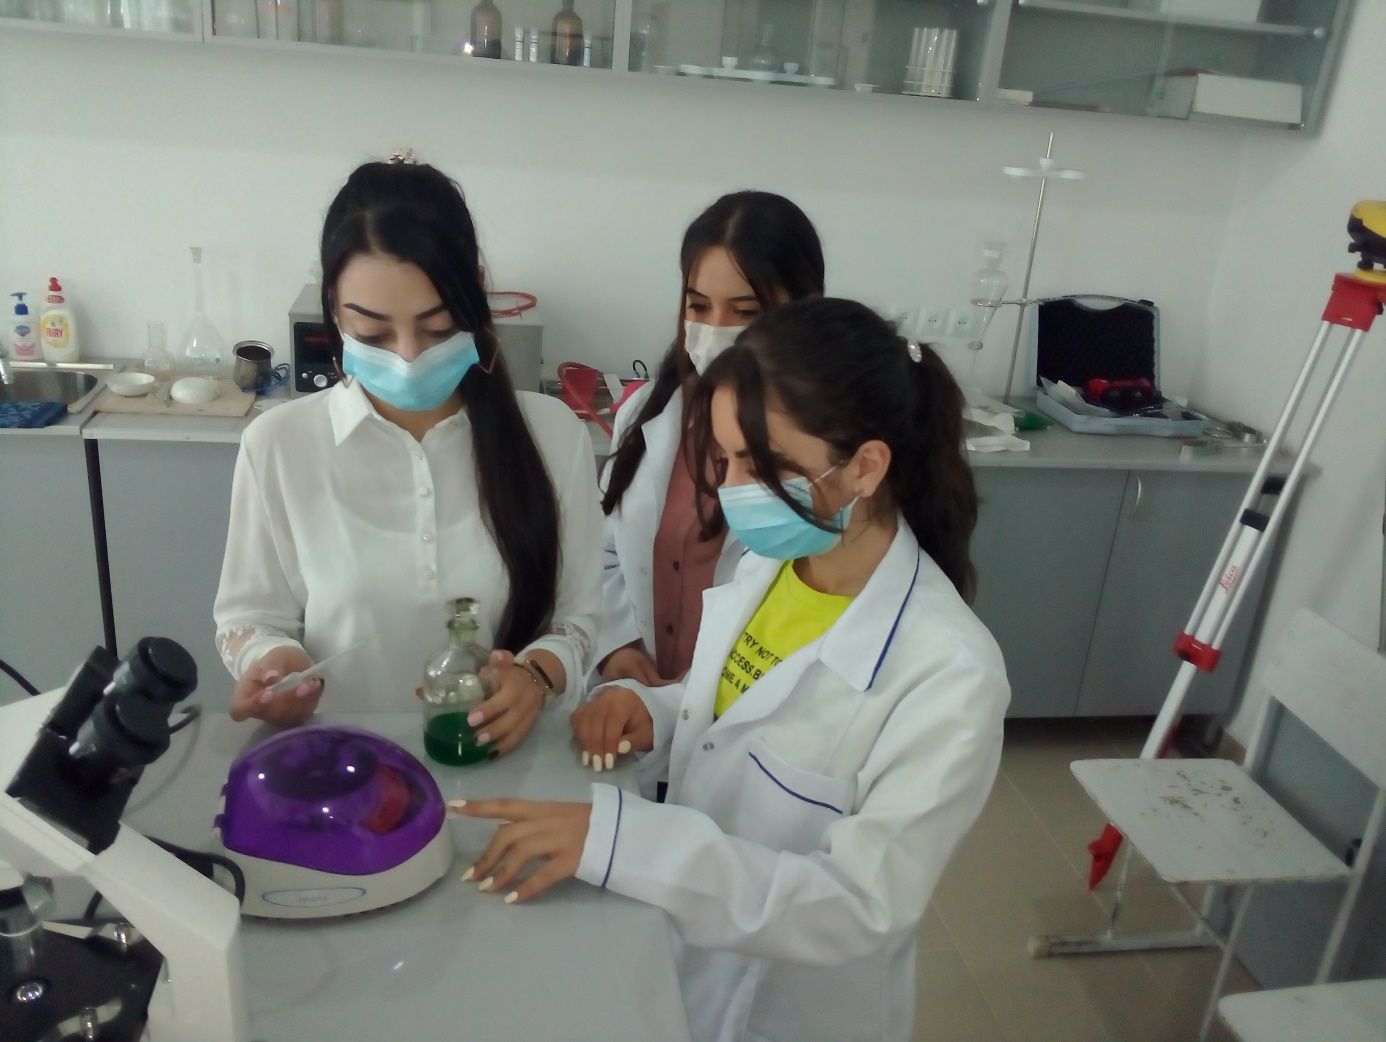 GSU laboratory of Natural Sciences conducts research